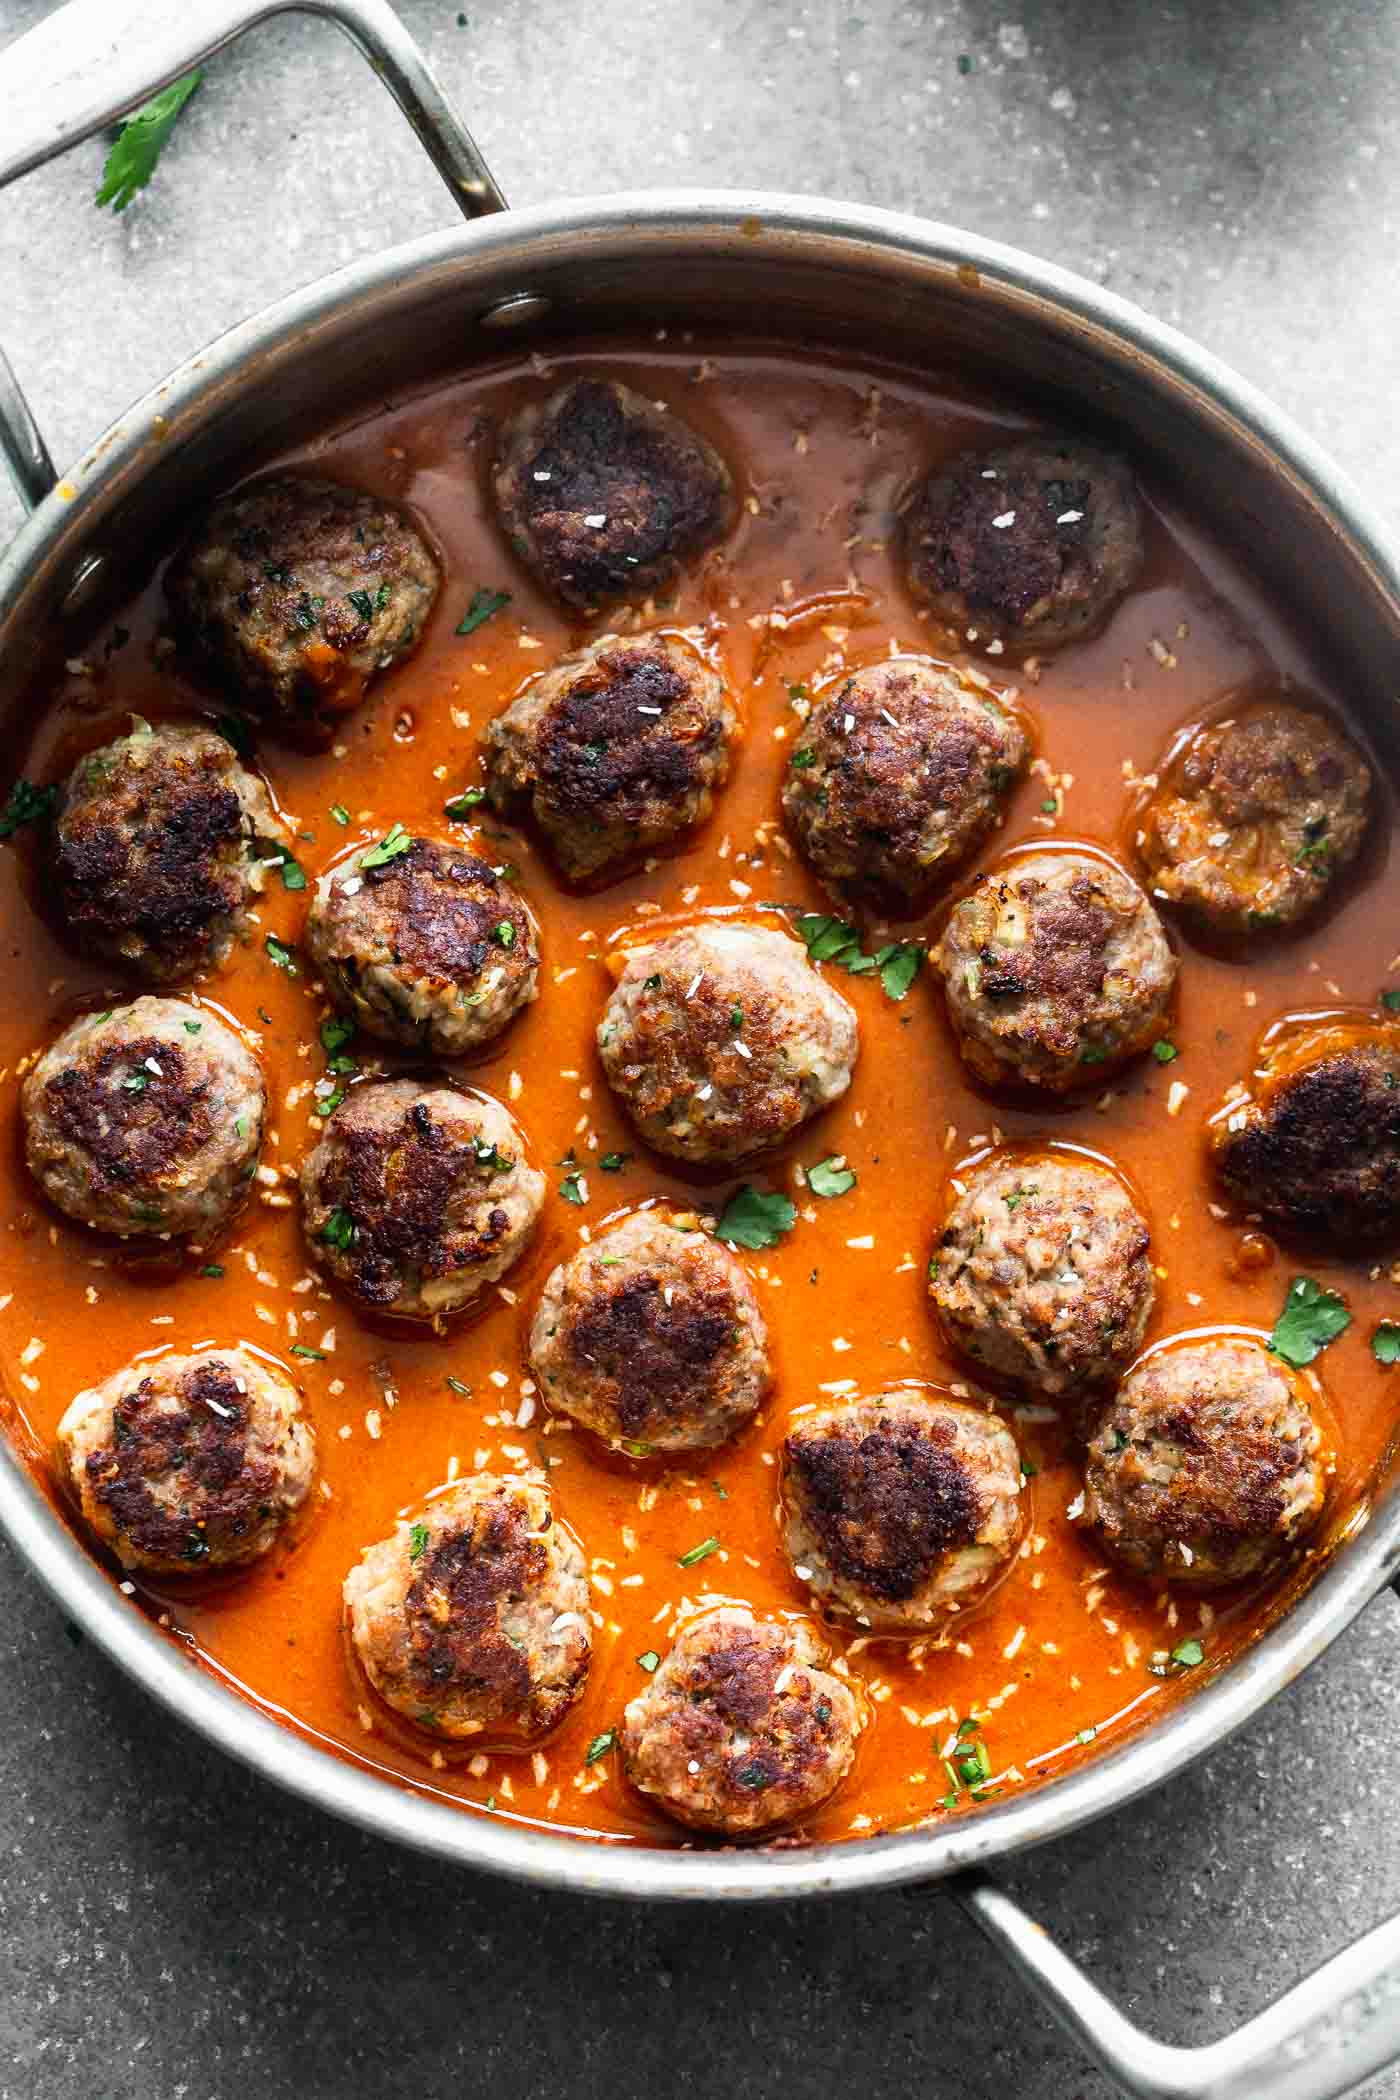 These Coconut Curry Meatballs require minimal ingredients, but have SO much flavor. They're packed with garlic, ginger, onion and cilantro, browned until crisp, and bathed in a luscious coconut curry sauce. Only 30 minutes from start to finish!&nbsp;